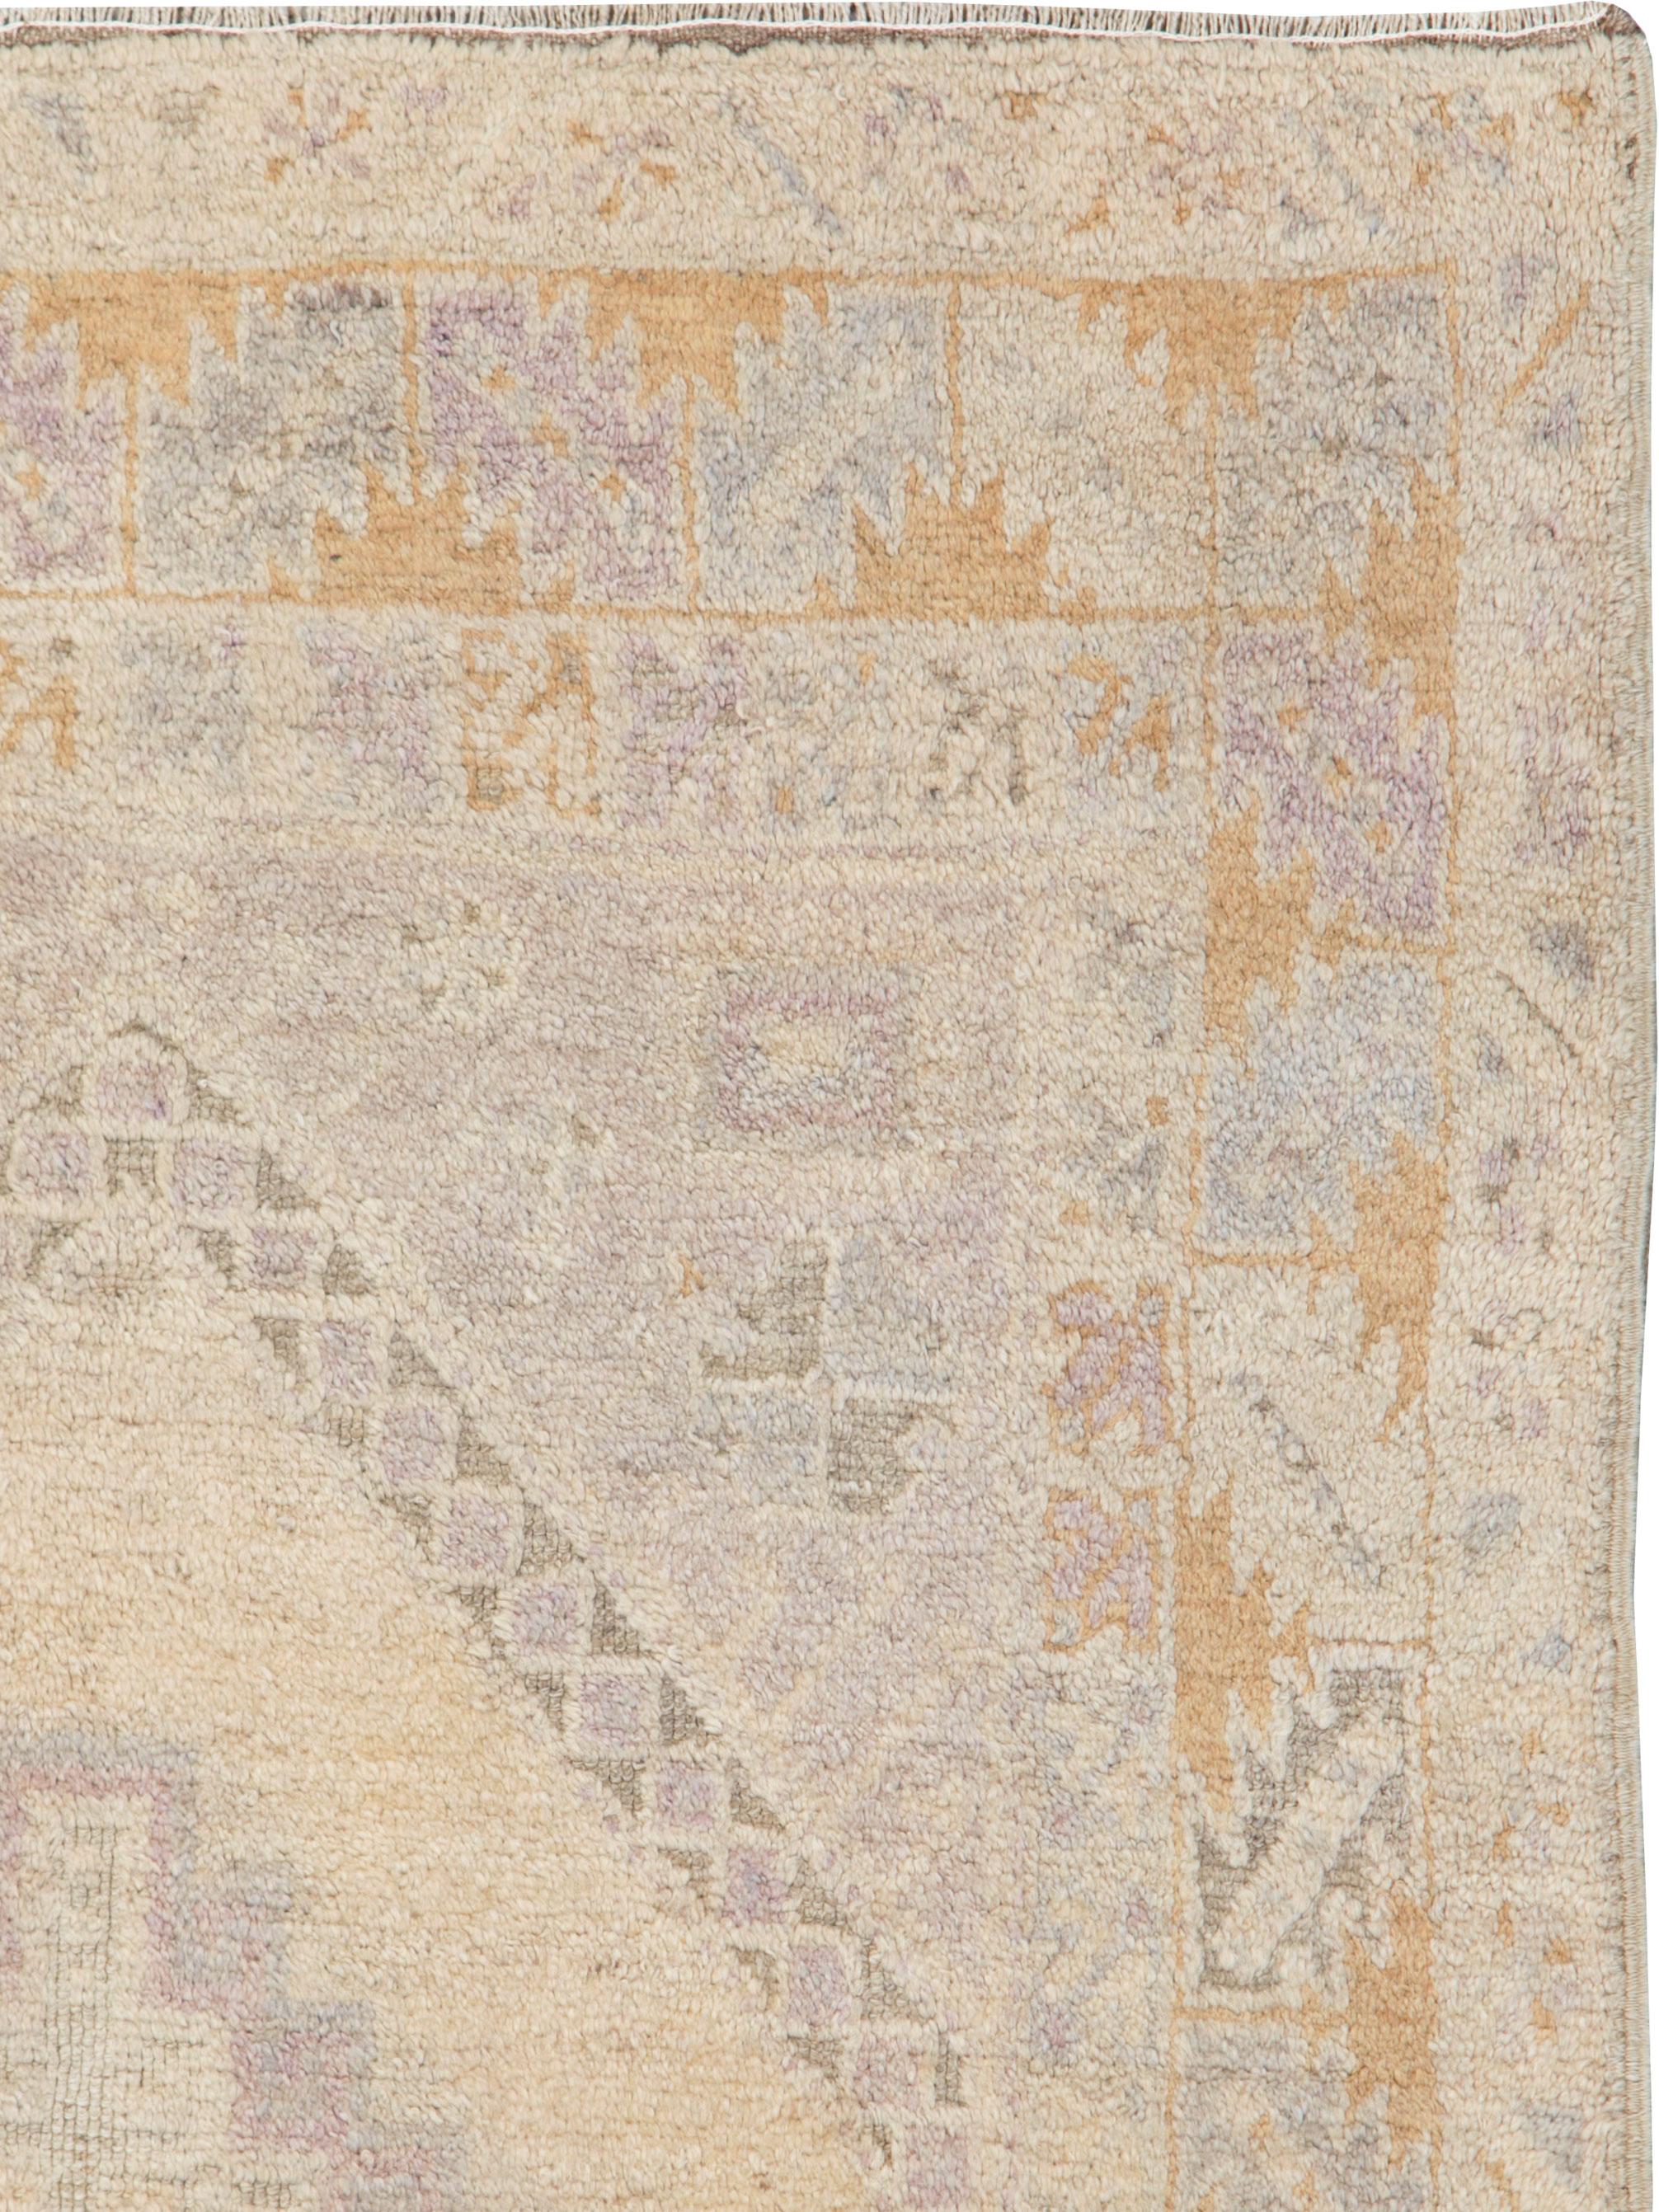 A vintage Turkish Anatolian rug. An overall soft palette dominates this rustic scatter with a soft beige hexagonal field centering a stepped beige and purple medallion. Rust-gold half ashiks decorate the main border of this subdued Anatolian